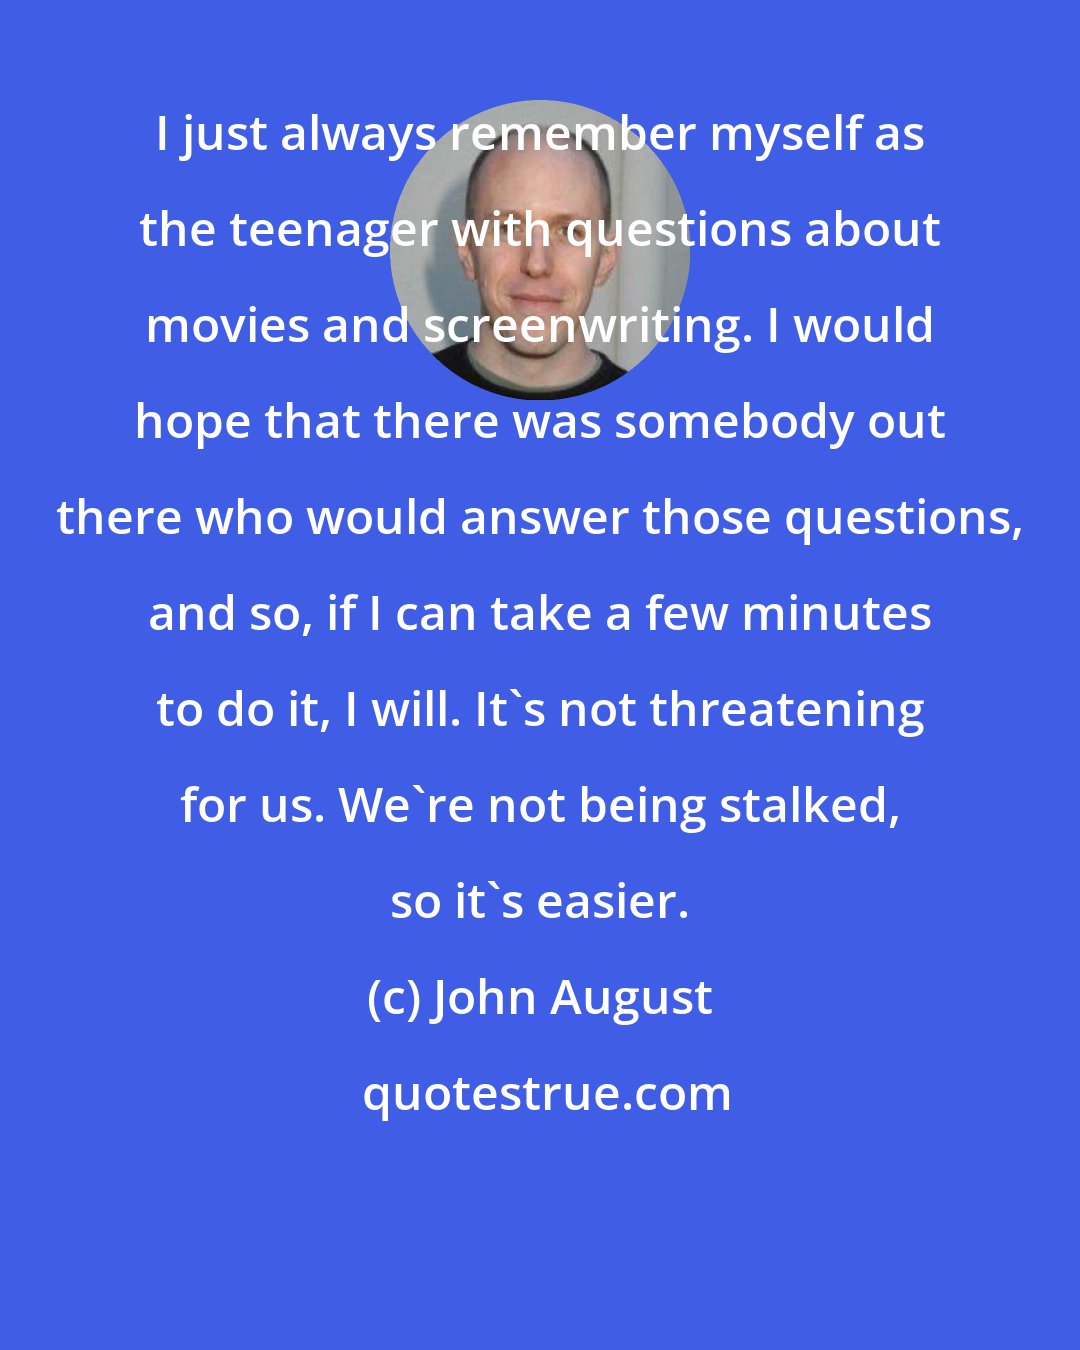 John August: I just always remember myself as the teenager with questions about movies and screenwriting. I would hope that there was somebody out there who would answer those questions, and so, if I can take a few minutes to do it, I will. It's not threatening for us. We're not being stalked, so it's easier.